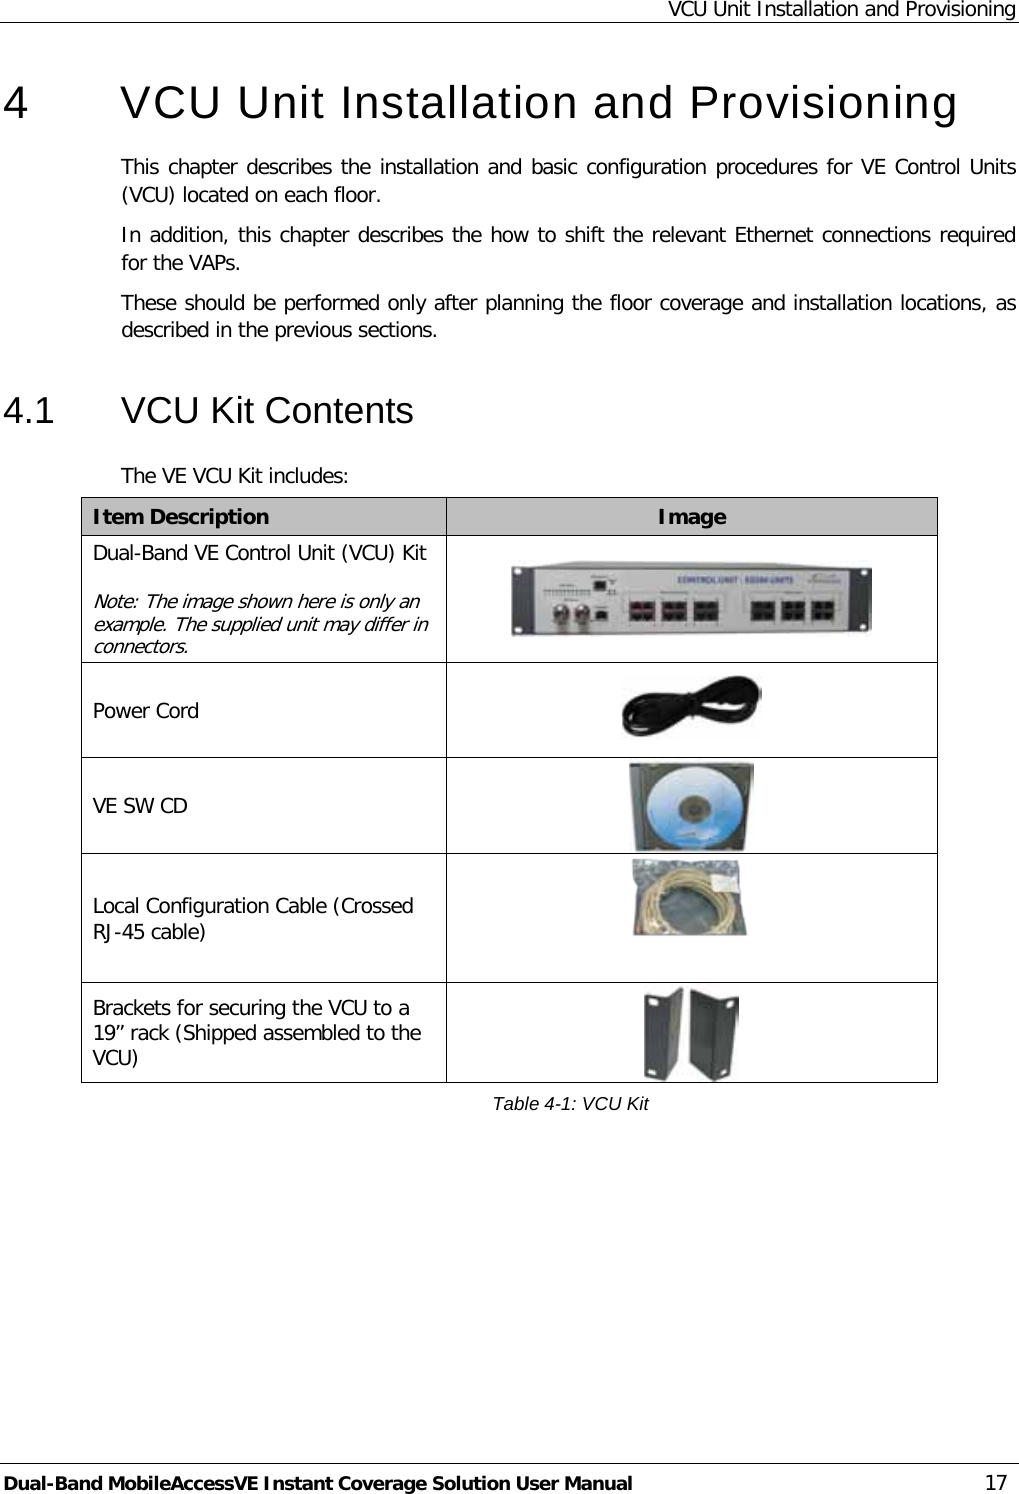 VCU Unit Installation and Provisioning Dual-Band MobileAccessVE Instant Coverage Solution User Manual 17 4  VCU Unit Installation and Provisioning This chapter describes the installation and basic configuration procedures for VE Control Units (VCU) located on each floor.  In addition, this chapter describes the how to shift the relevant Ethernet connections required for the VAPs.  These should be performed only after planning the floor coverage and installation locations, as described in the previous sections. 4.1  VCU Kit Contents The VE VCU Kit includes: Item Description Image Dual-Band VE Control Unit (VCU) Kit  Note: The image shown here is only an example. The supplied unit may differ in connectors.    Power Cord  VE SW CD  Local Configuration Cable (Crossed RJ-45 cable)  Brackets for securing the VCU to a 19” rack (Shipped assembled to the VCU)  Table  4-1: VCU Kit  